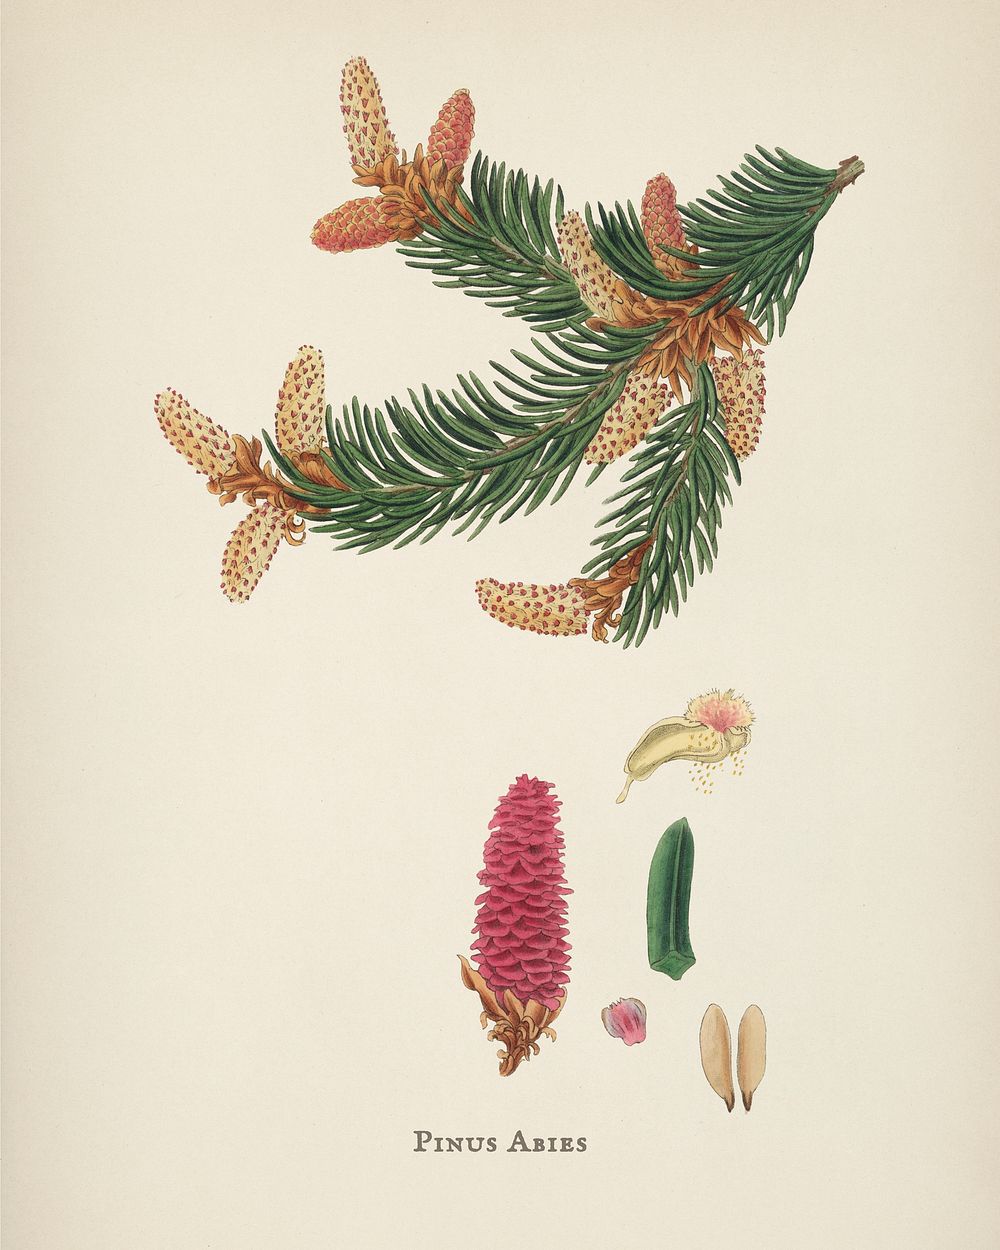 Norway spruce (Pinus Abies) illustration from Medical Botany (1836) by John Stephenson and James Morss Churchill.